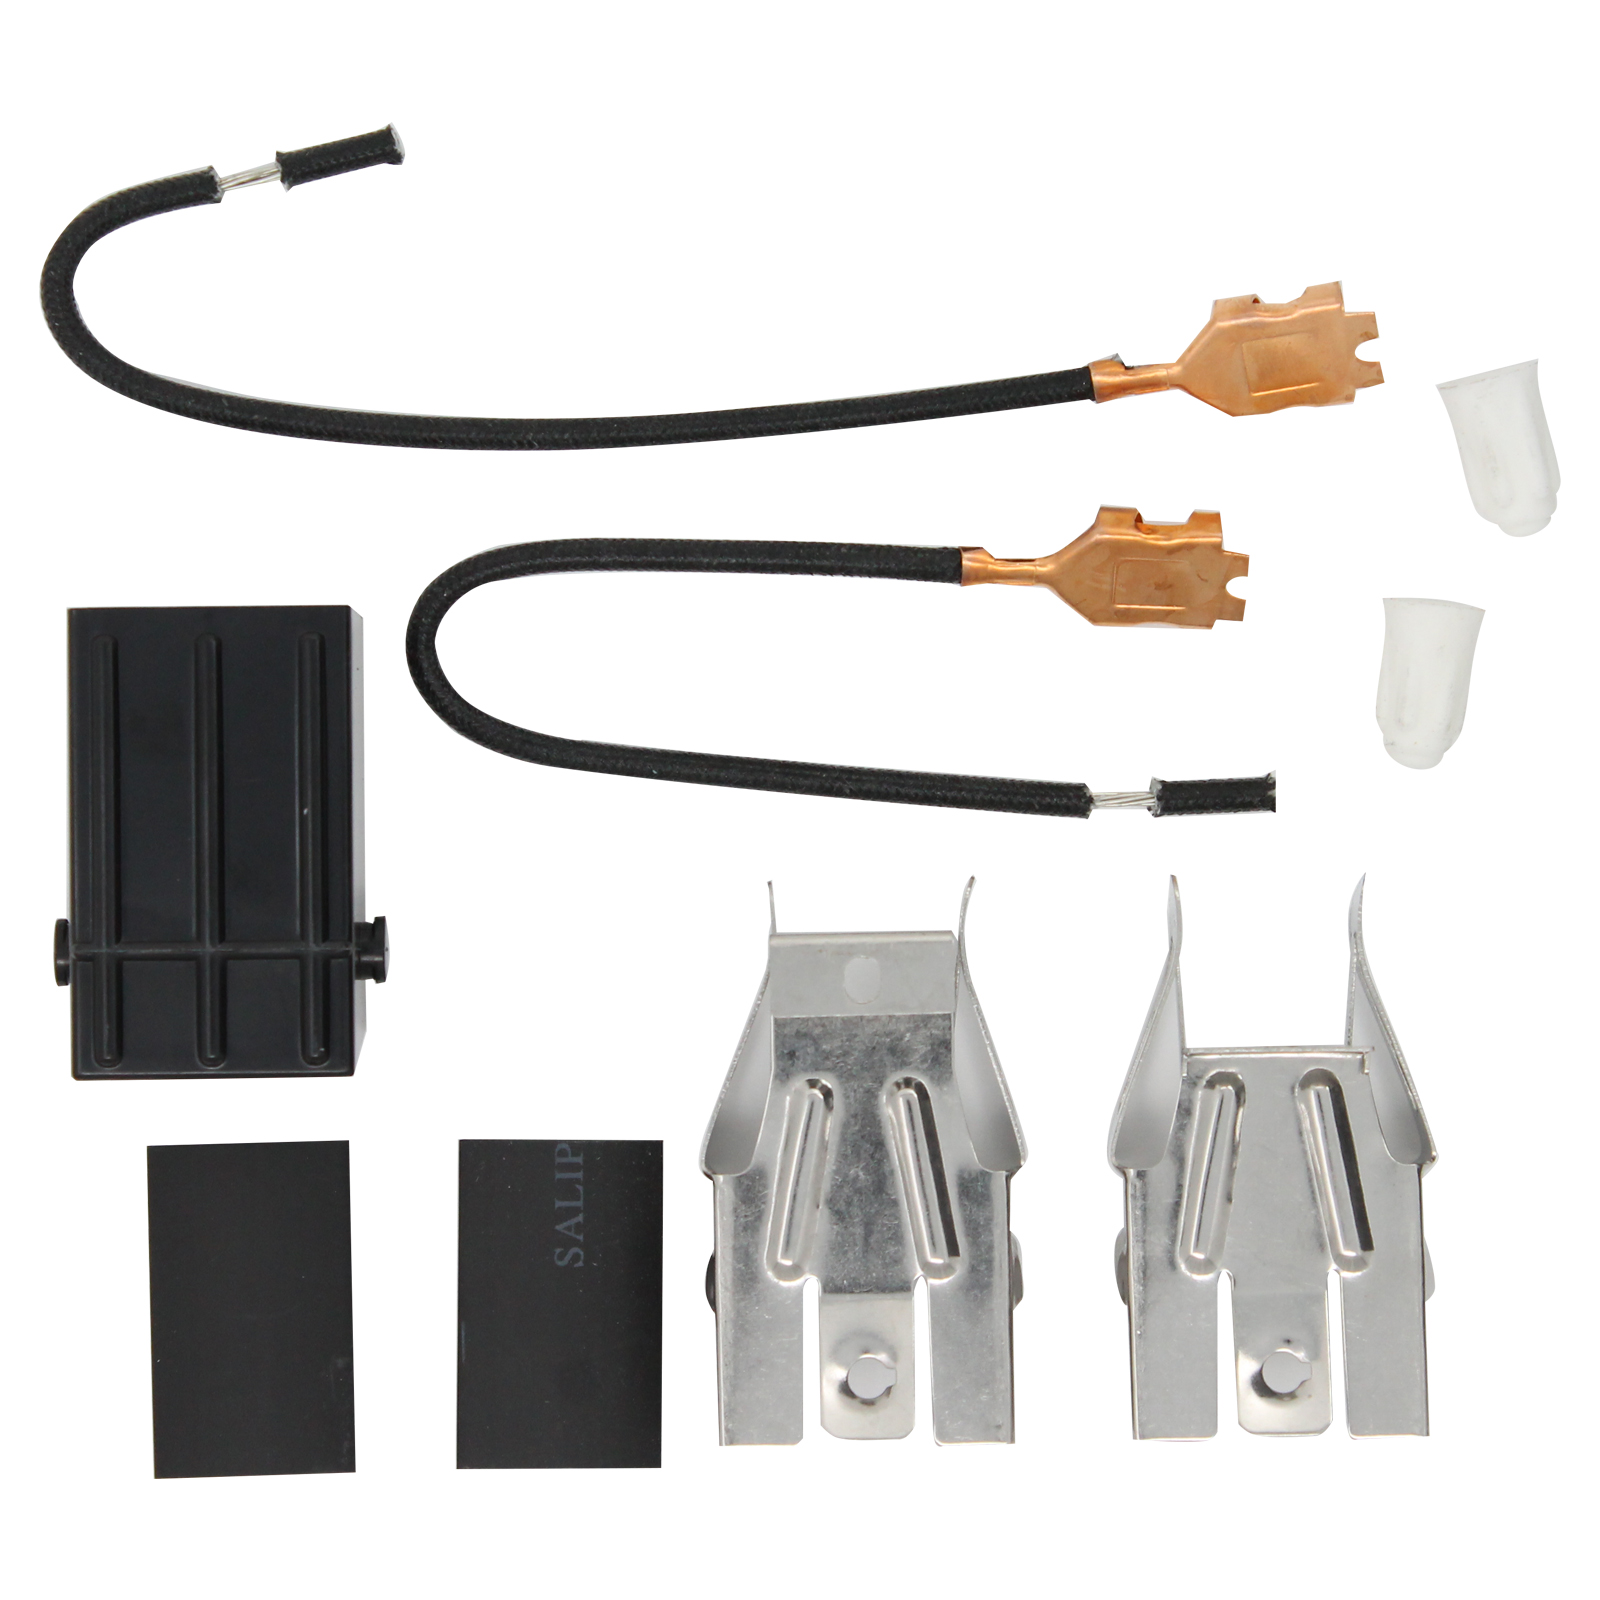 330031 Top Burner Receptacle Kit Replacement for Whirlpool F5808W0 Range/Cooktop/Oven - Compatible with 330031 Range Burner Receptacle Kit - UpStart Components Brand - image 2 of 4